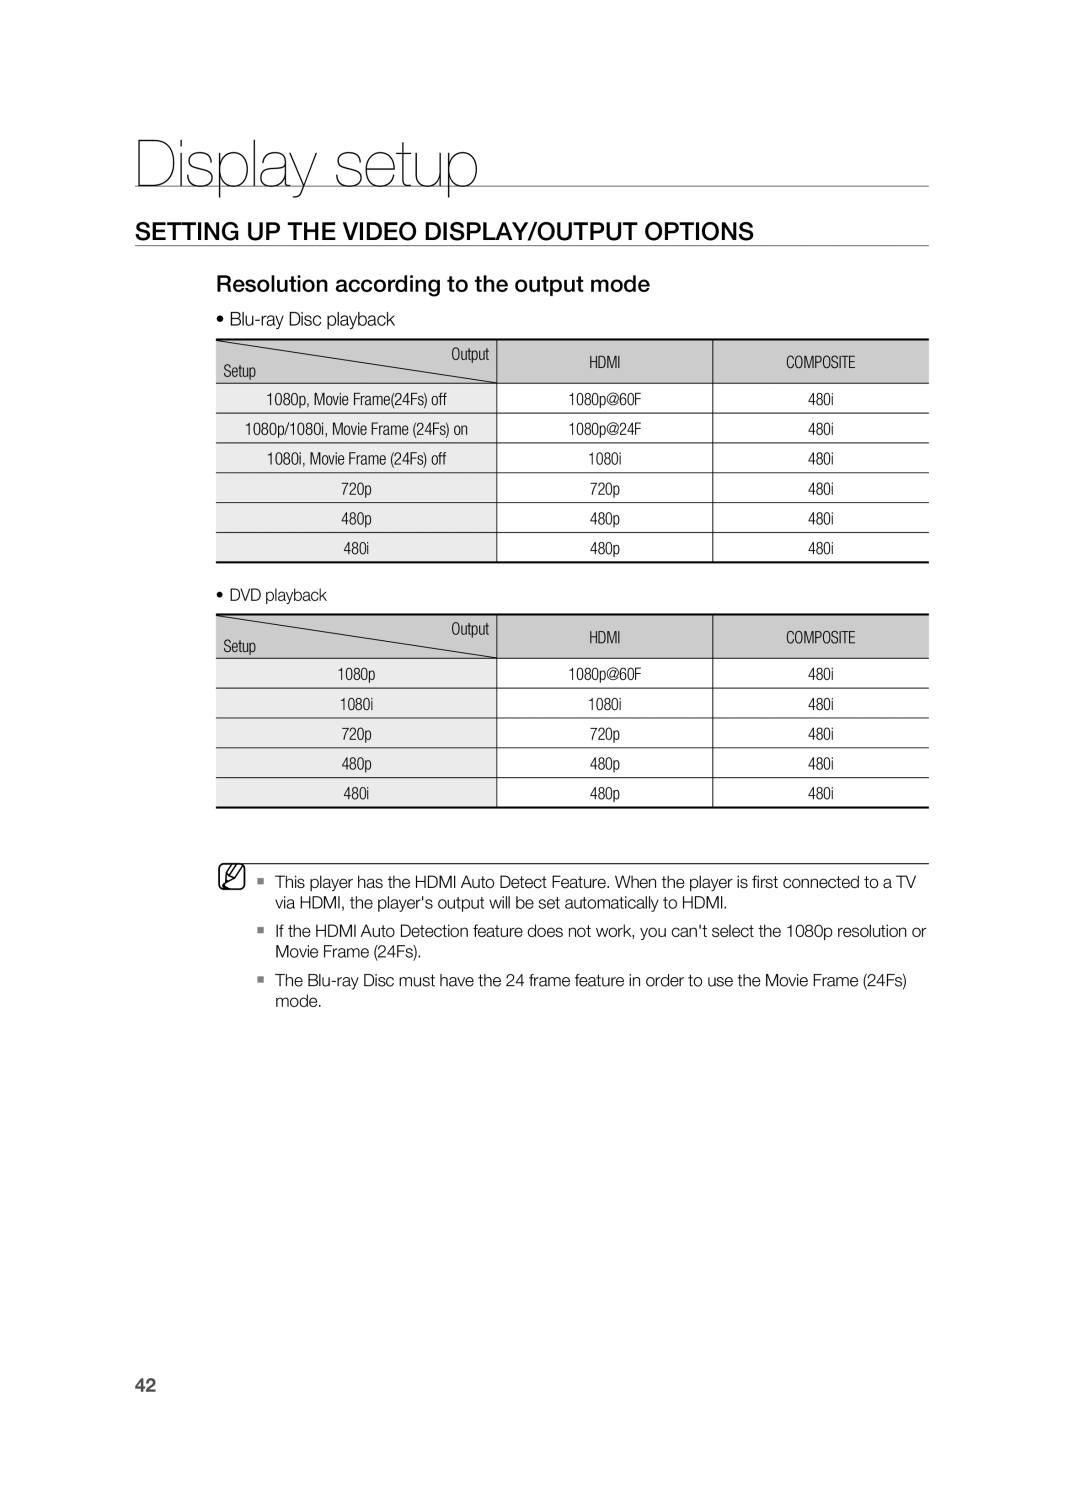 Samsung HT-BD8200 Setting Up The Video Display/Output Options, Resolution according to the output mode, Display setup 